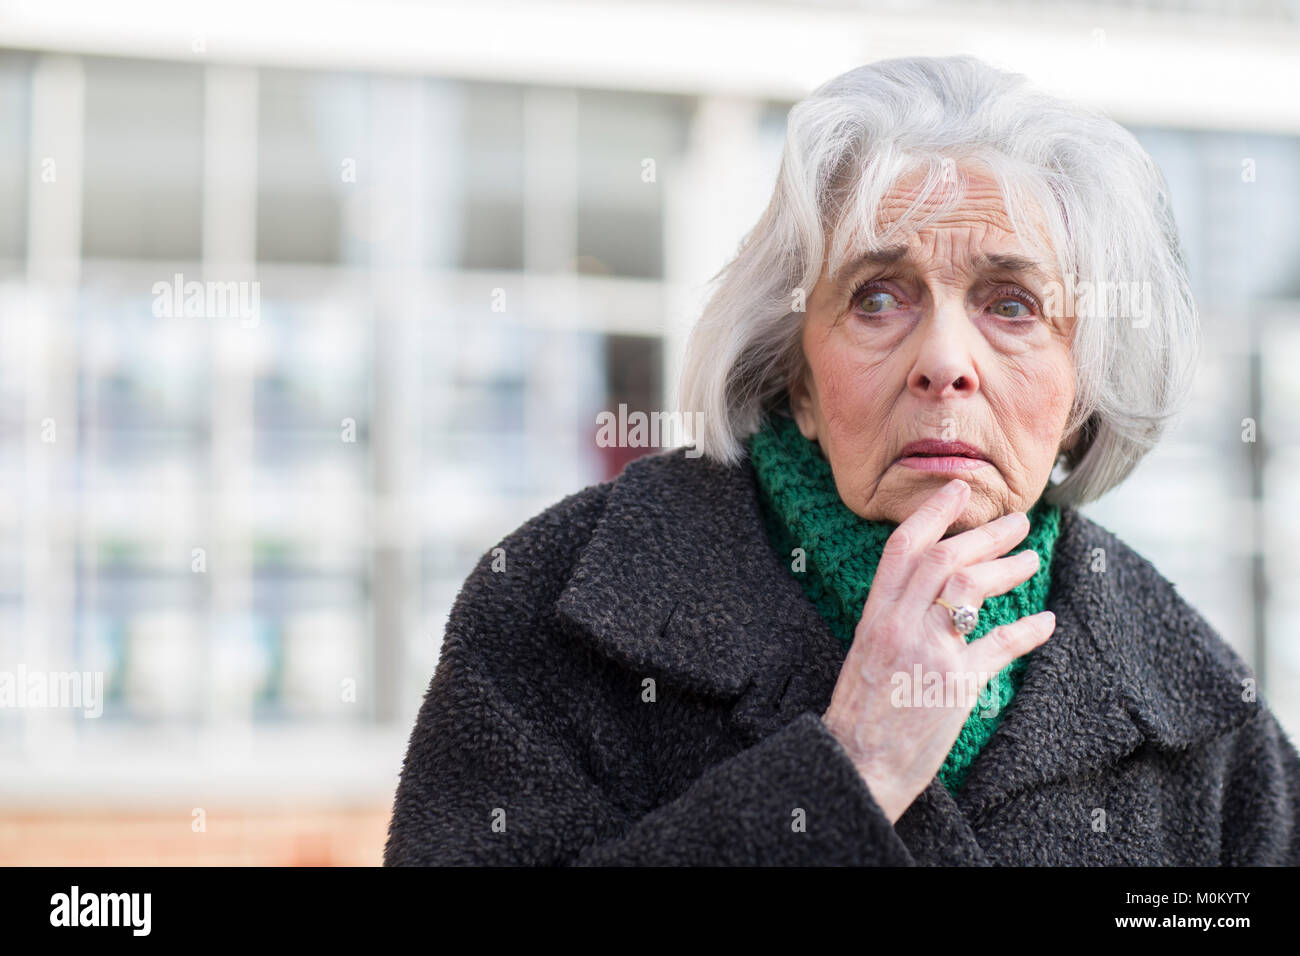 Worried Senior Woman Looking Lost Outdoors Stock Photo